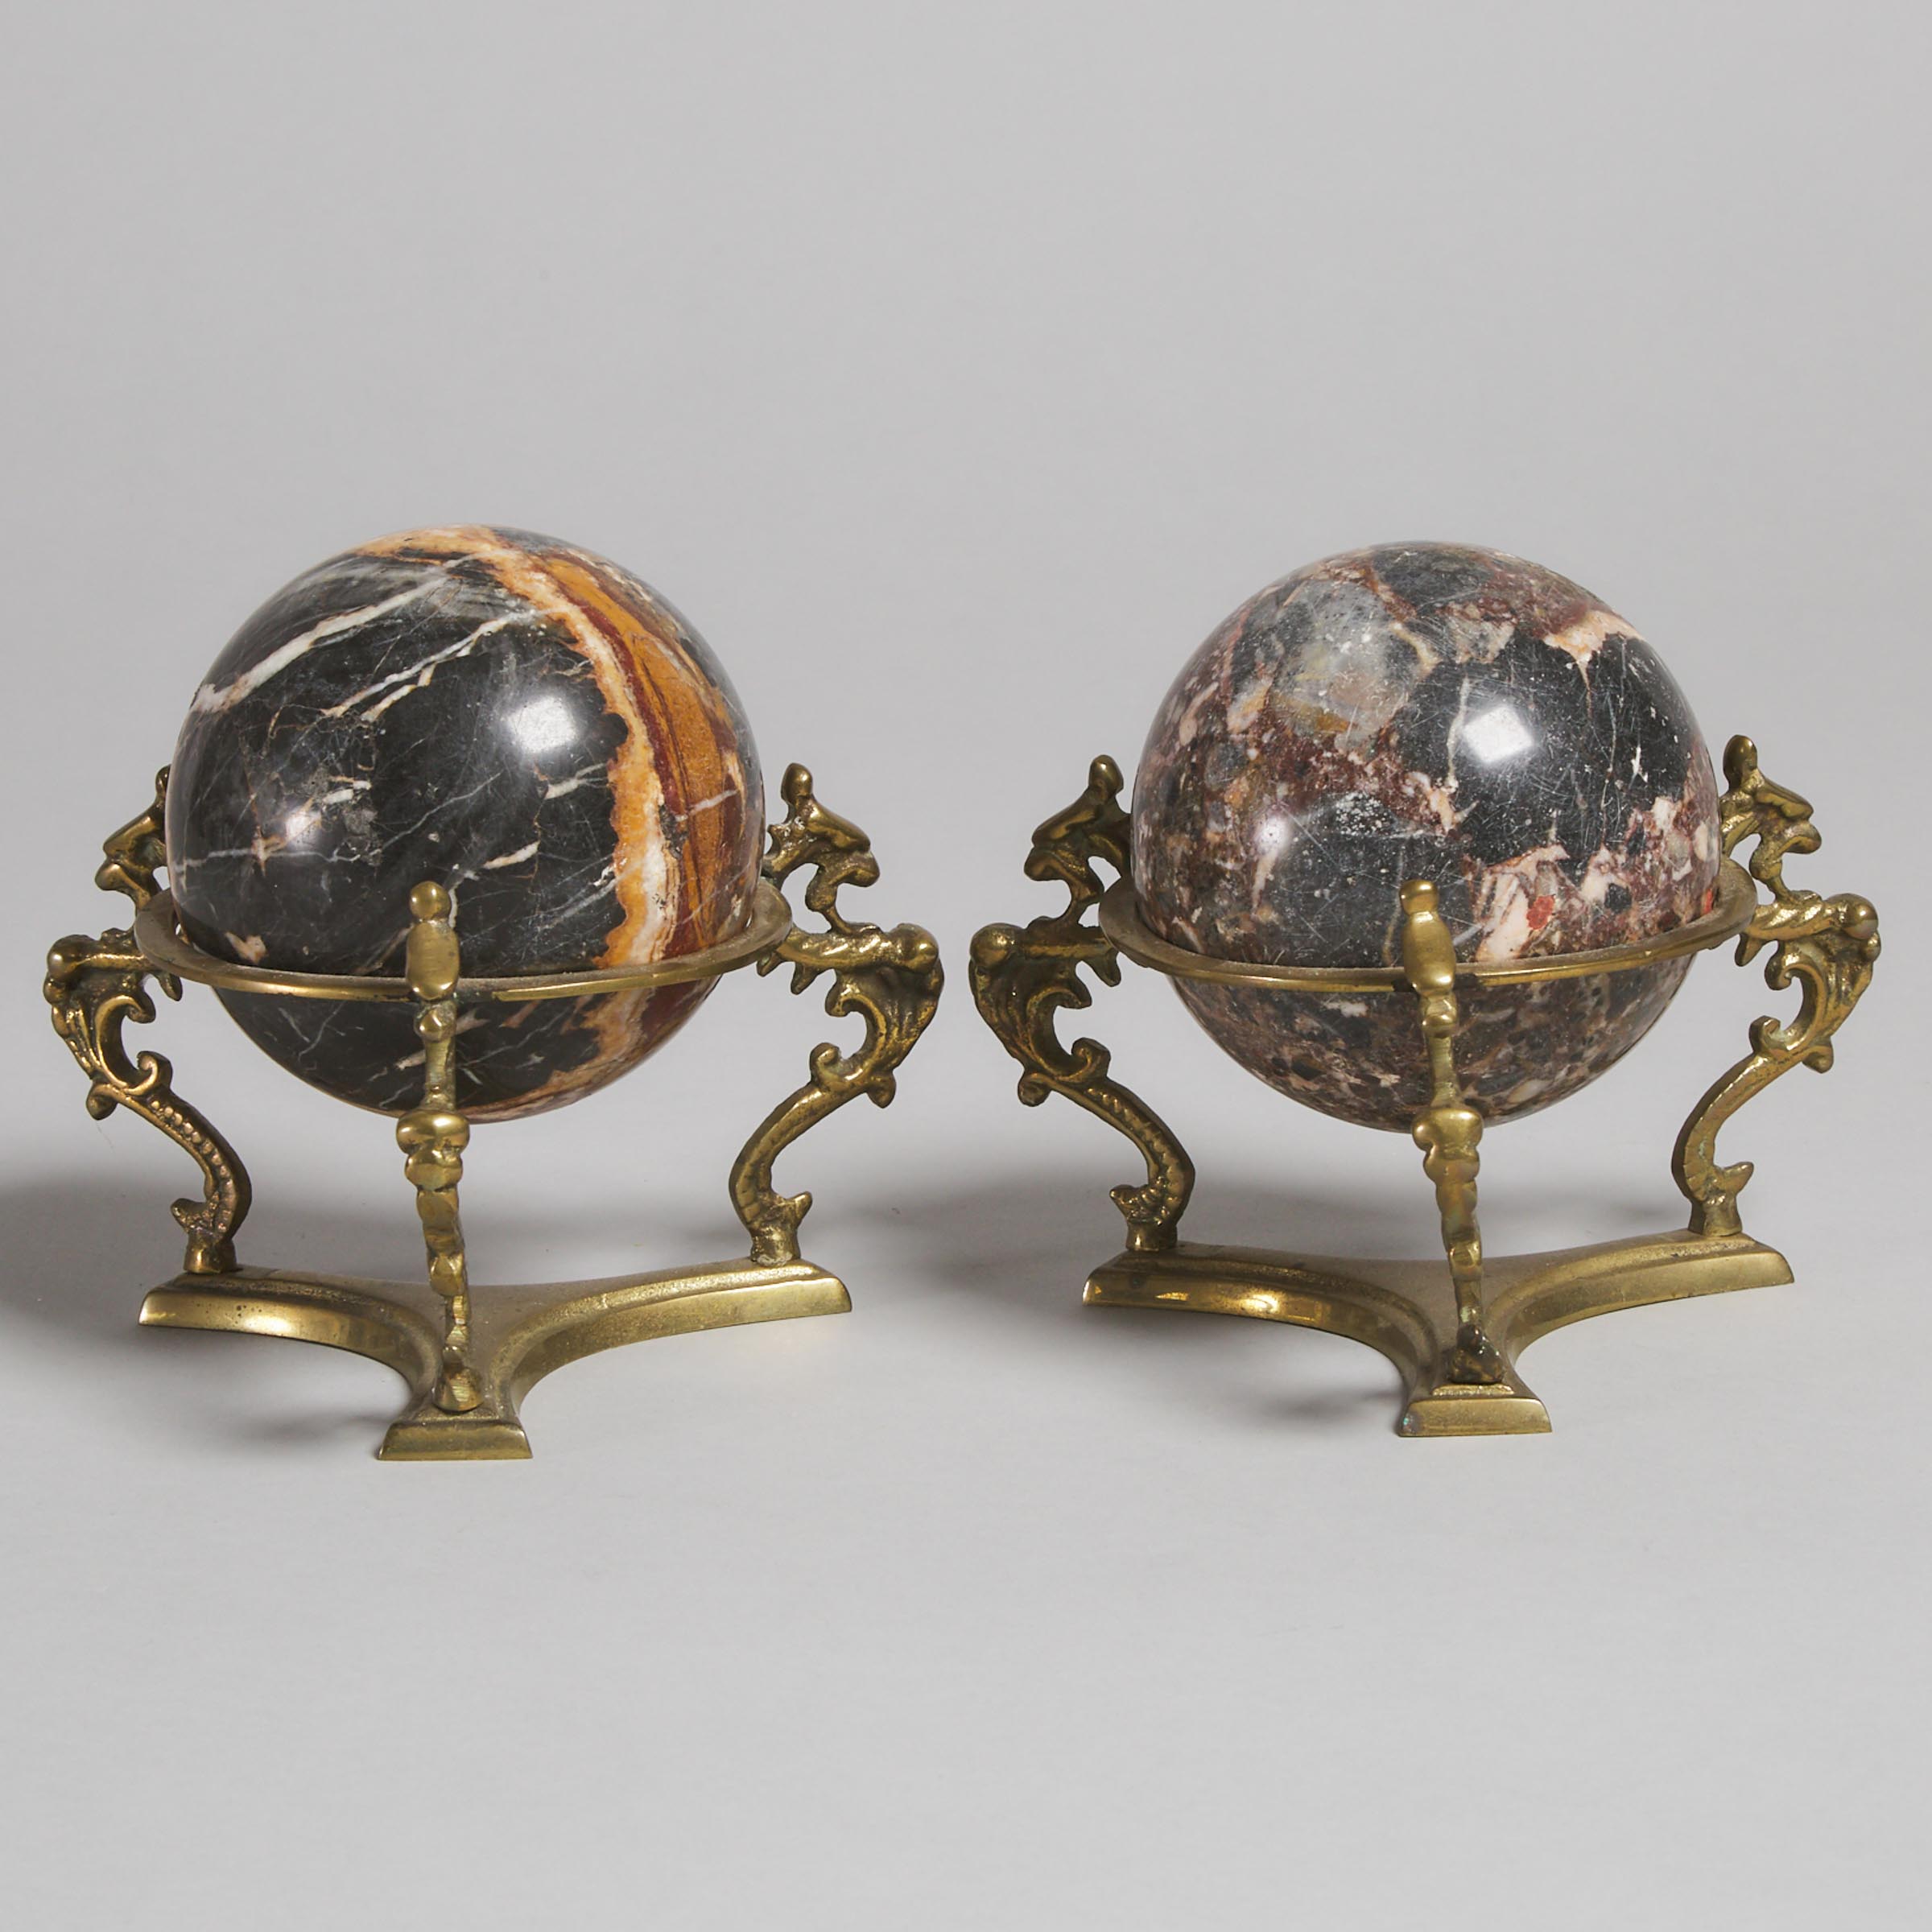 Pair of Specimen Marble Orbs on Bronze Stands, 20th century